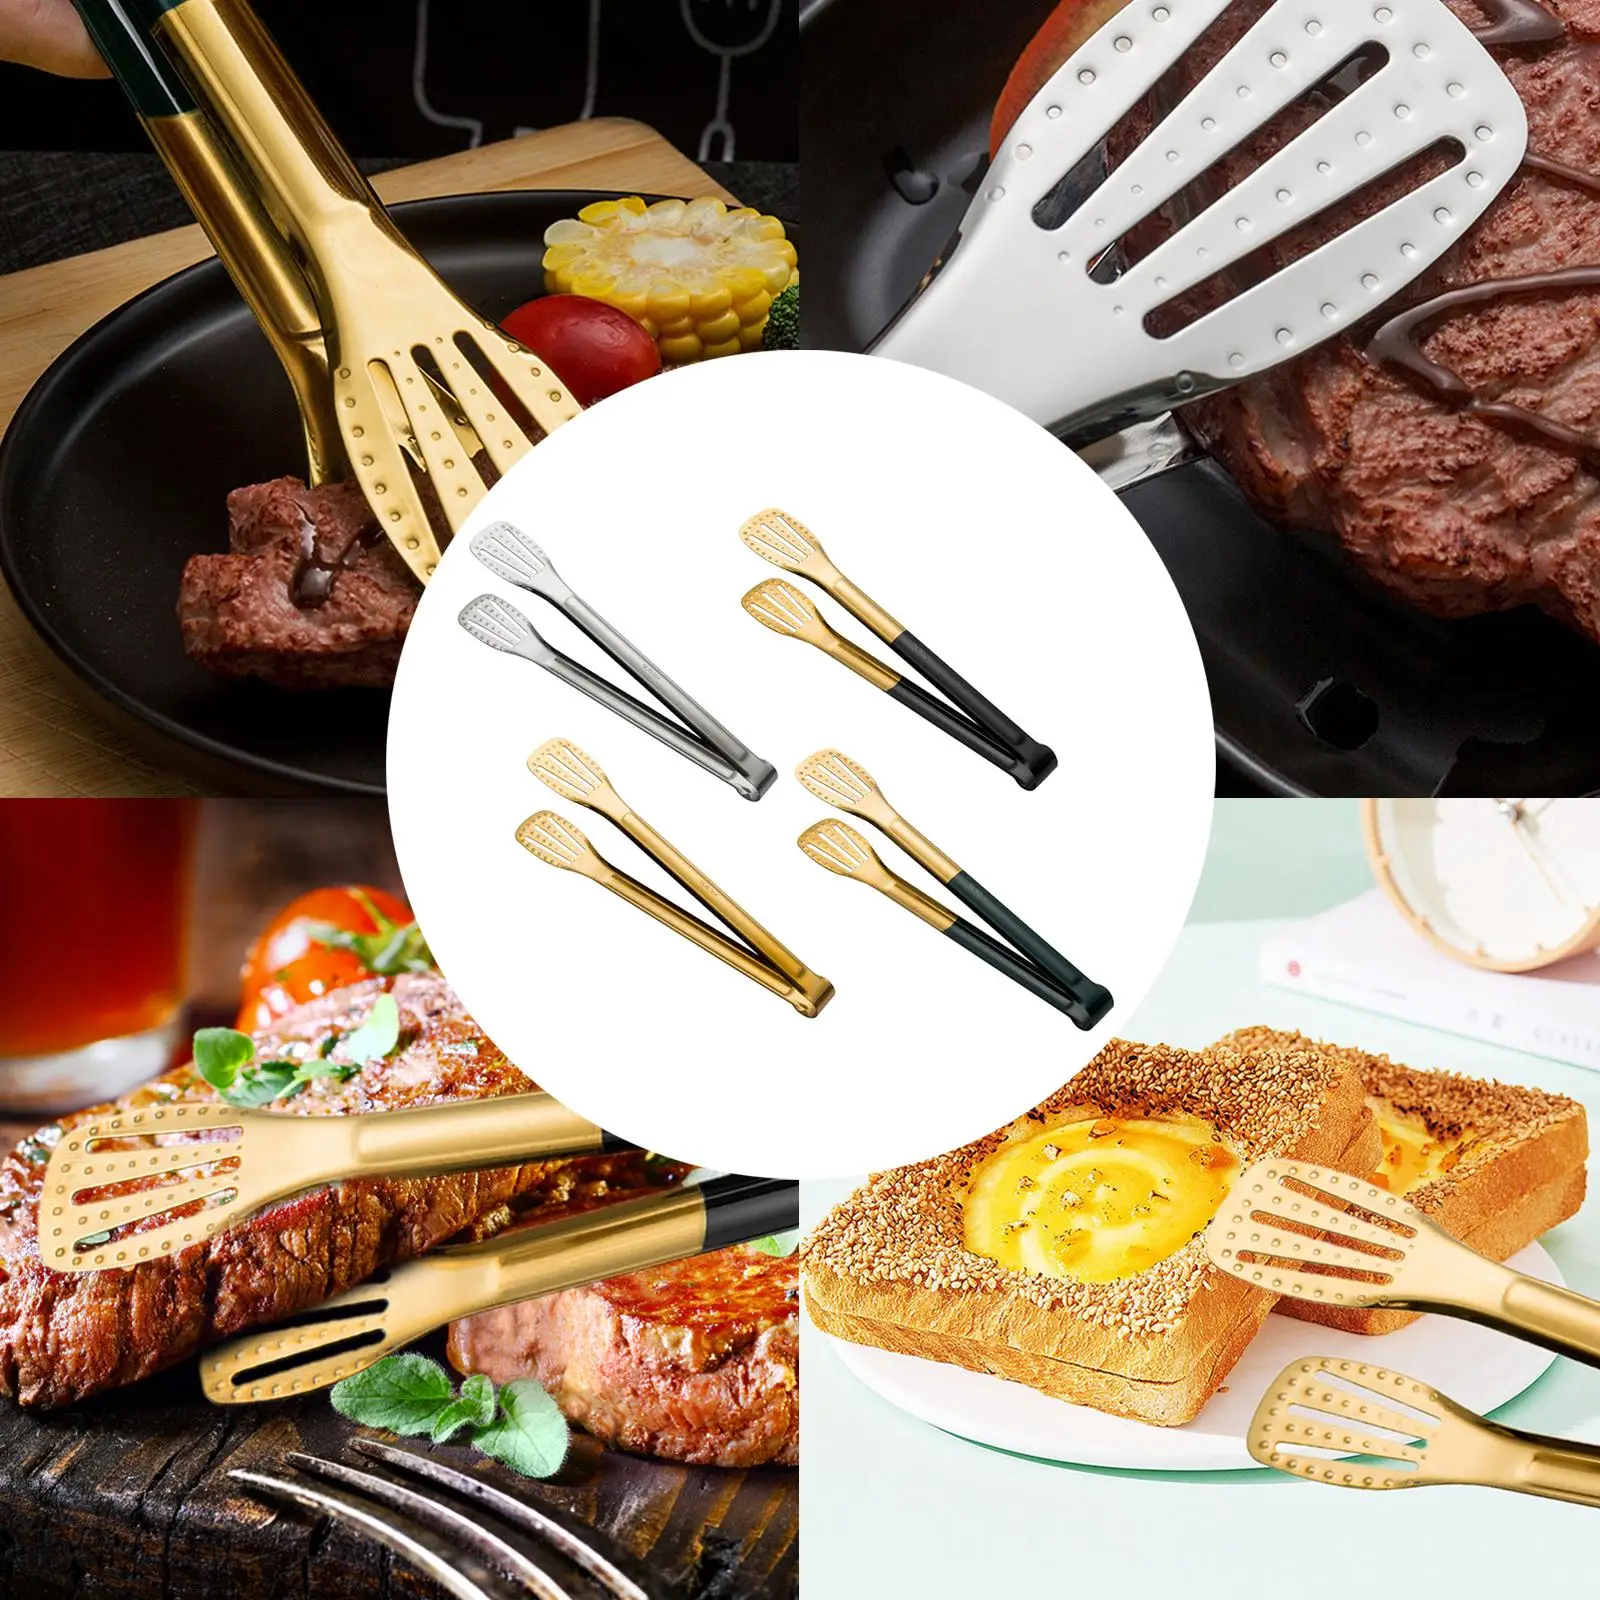 304 Stainless Steel Kitchen Tongs Non Slip Serving Heat Resistant Bread Baking Steak Clamp Frying Clip for BBQ Grilling Cooking